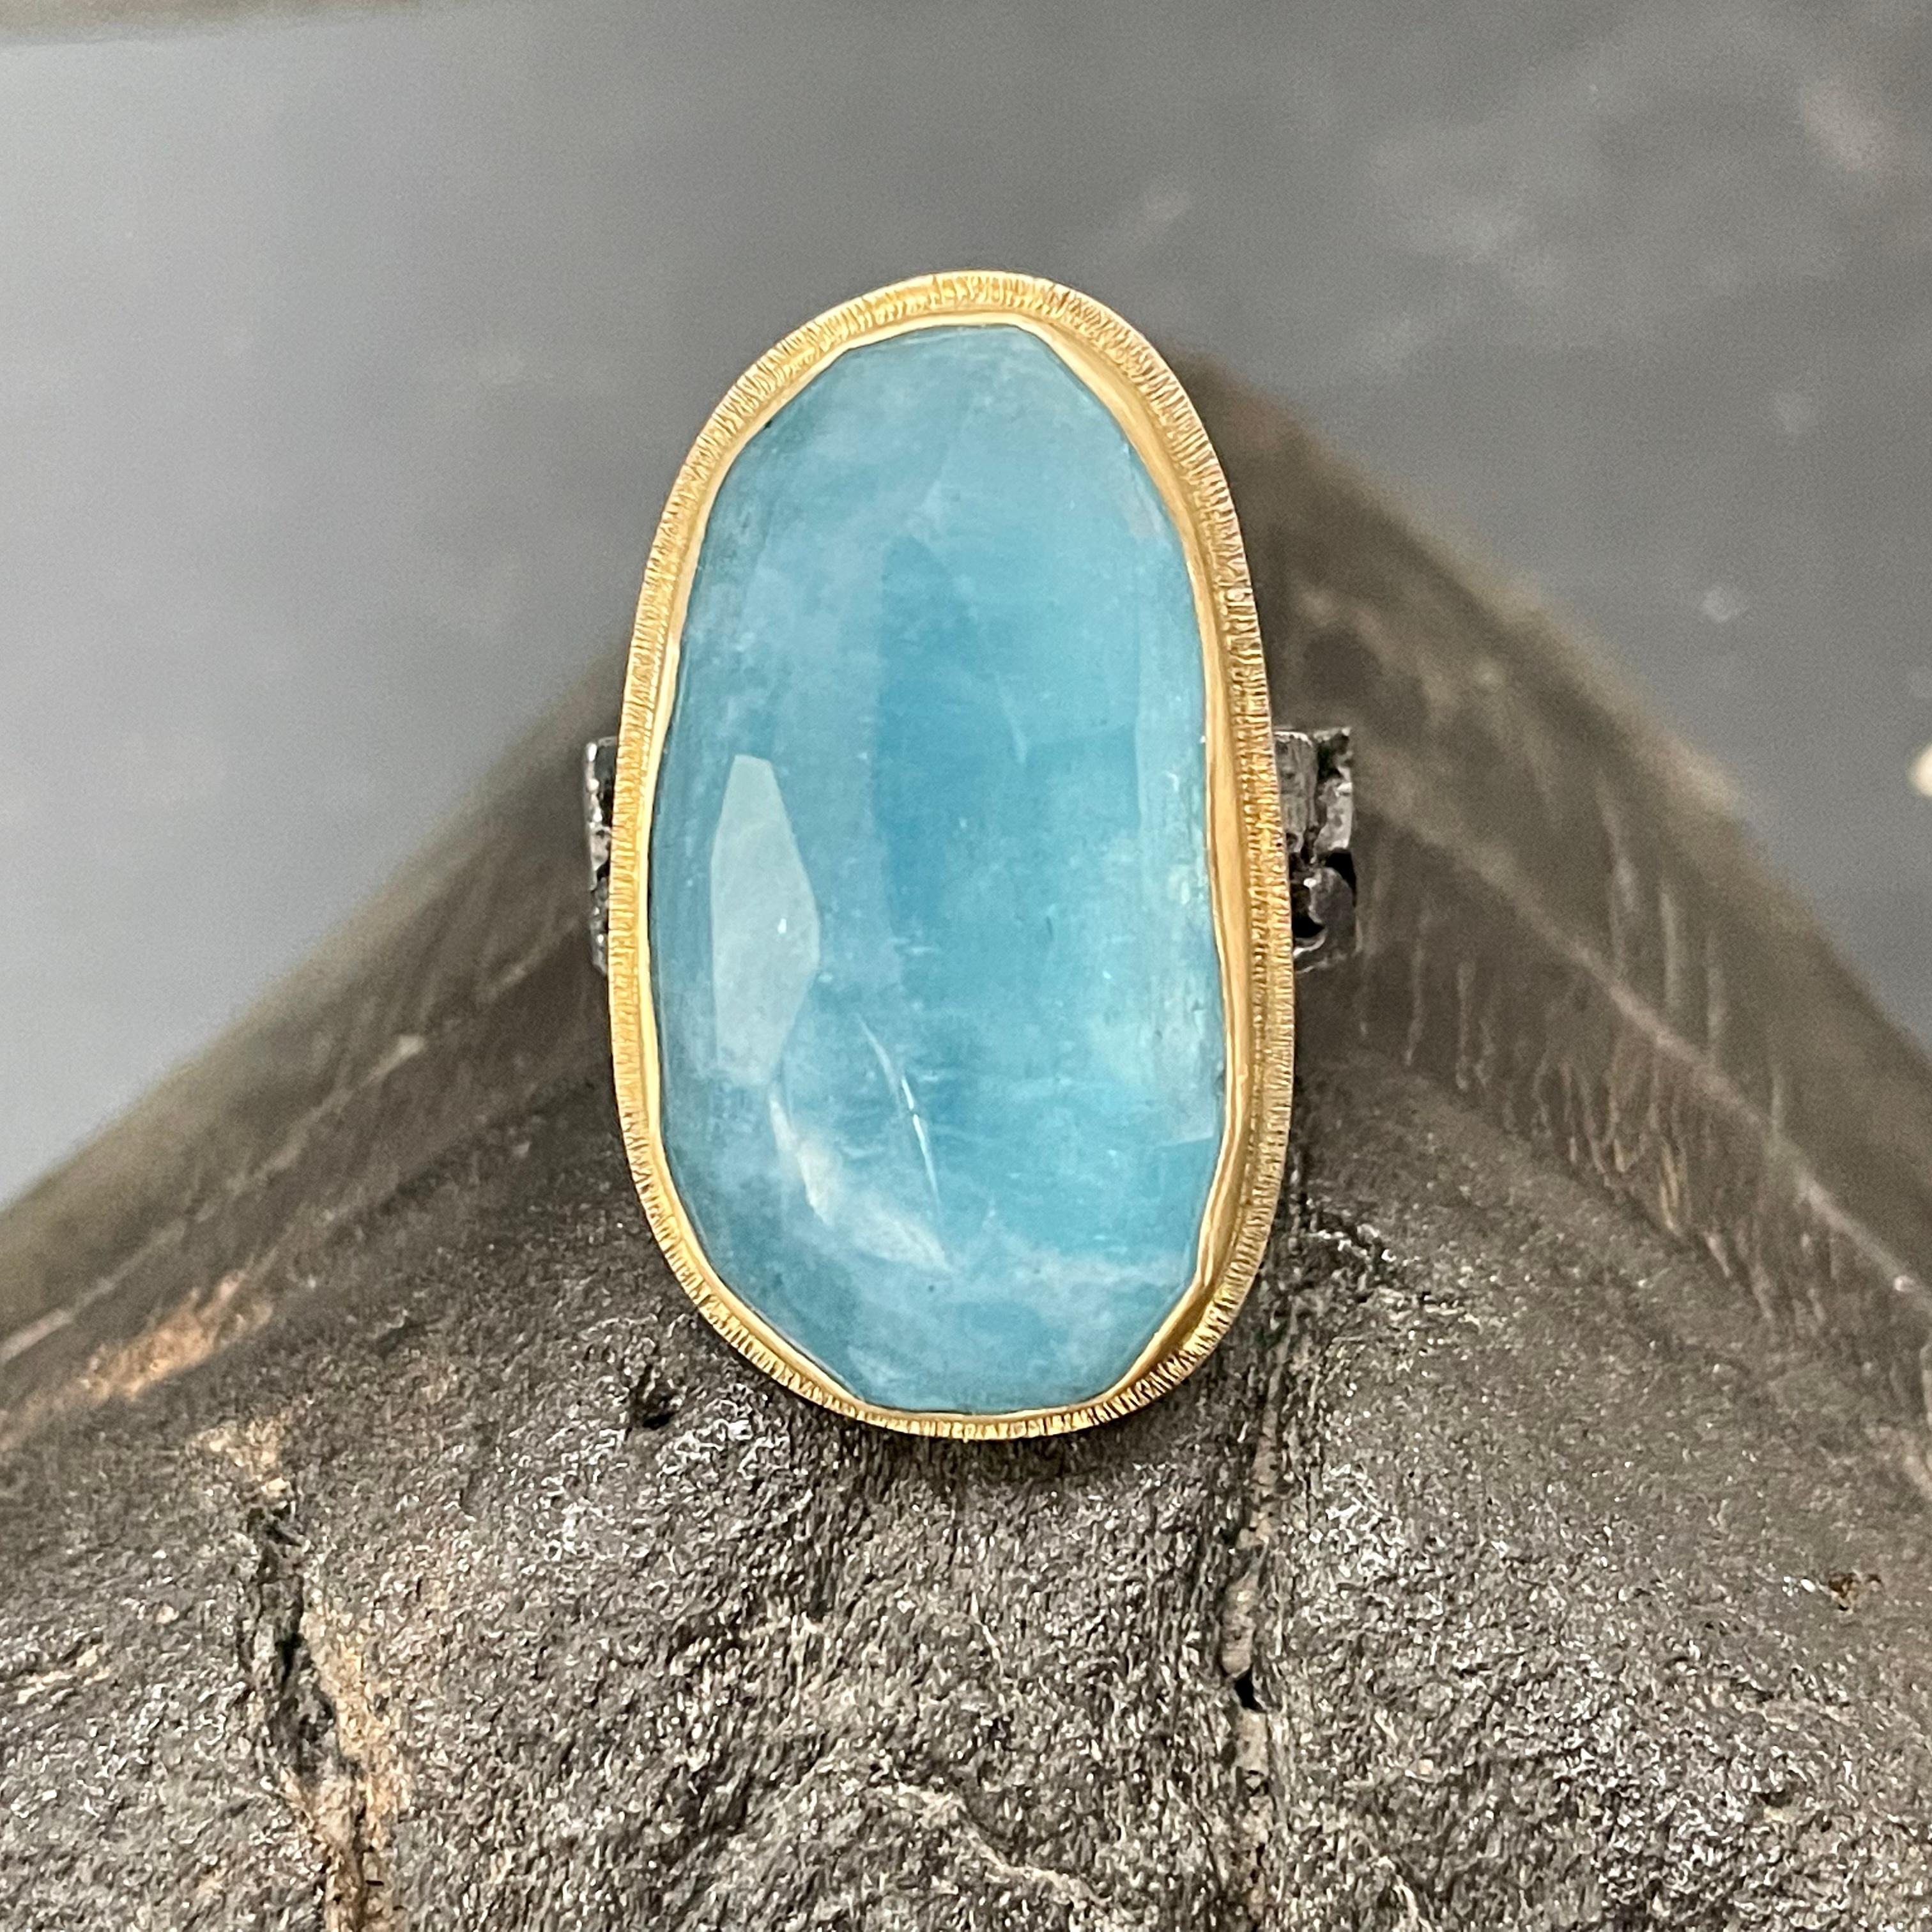 A deep sea-blue irregular shaped 15 x 28 mm rose cut aquamarine is held in a slightly wavy 18K gold bezel surrounded by a line textured 18K highlight accent, all atop a wide organic textured oxidized sterling silver shank. The ring is currently